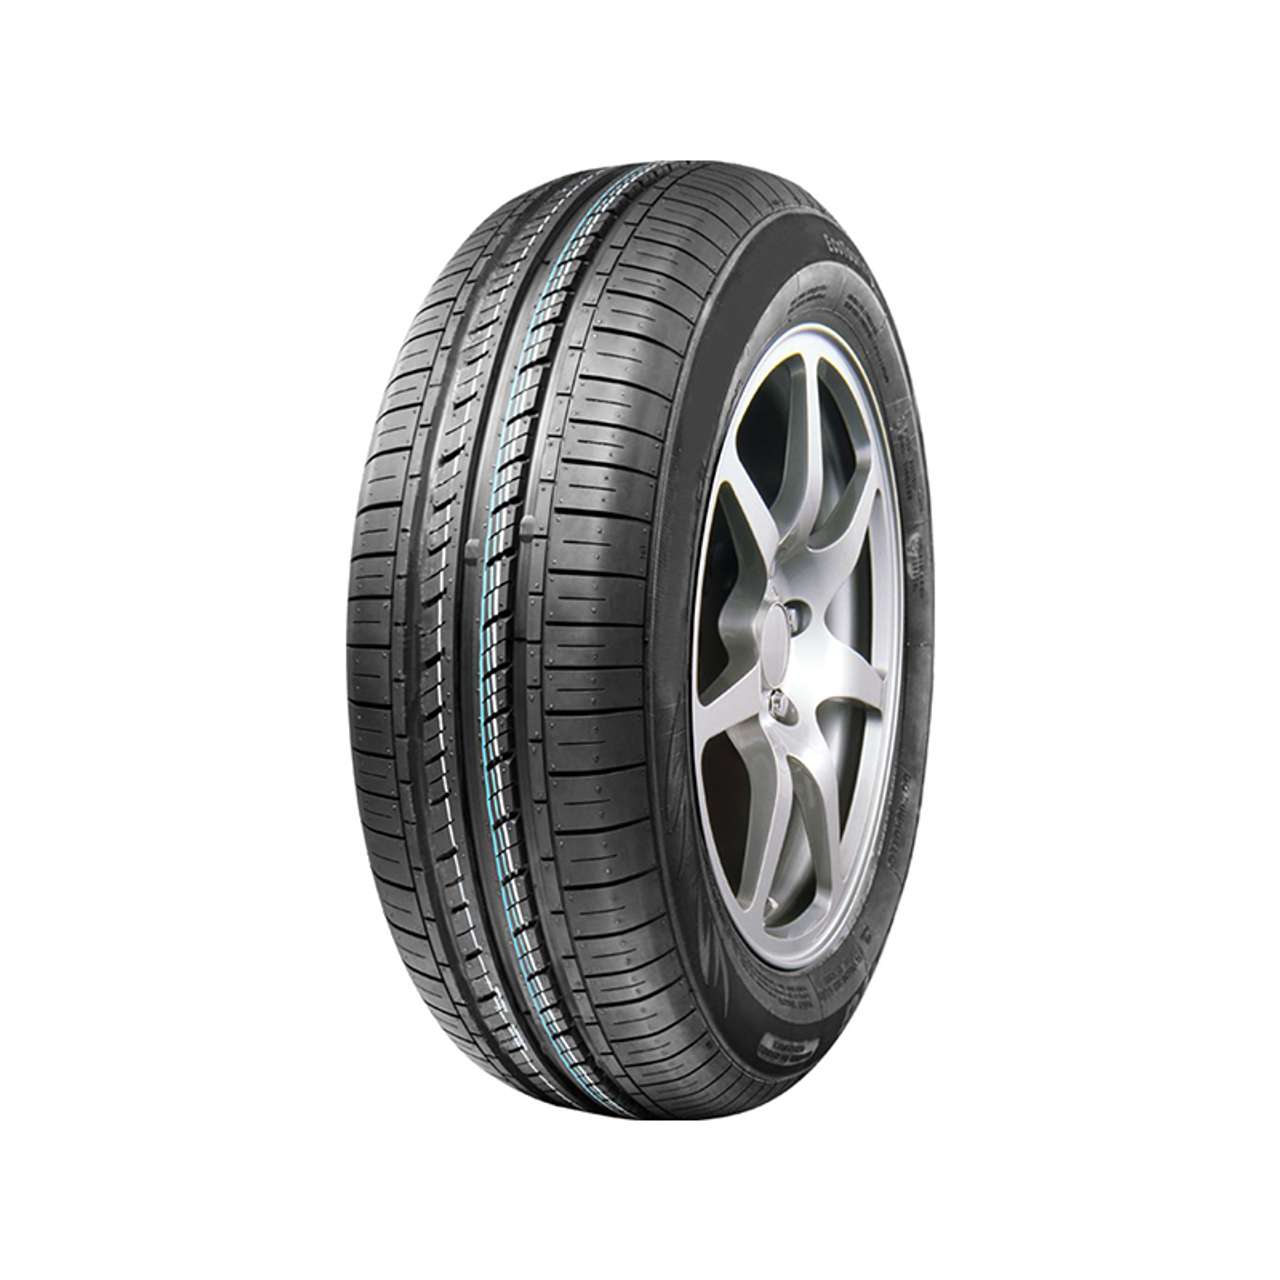 STAR PERFORMER COMET 235/75R15 105T BSW